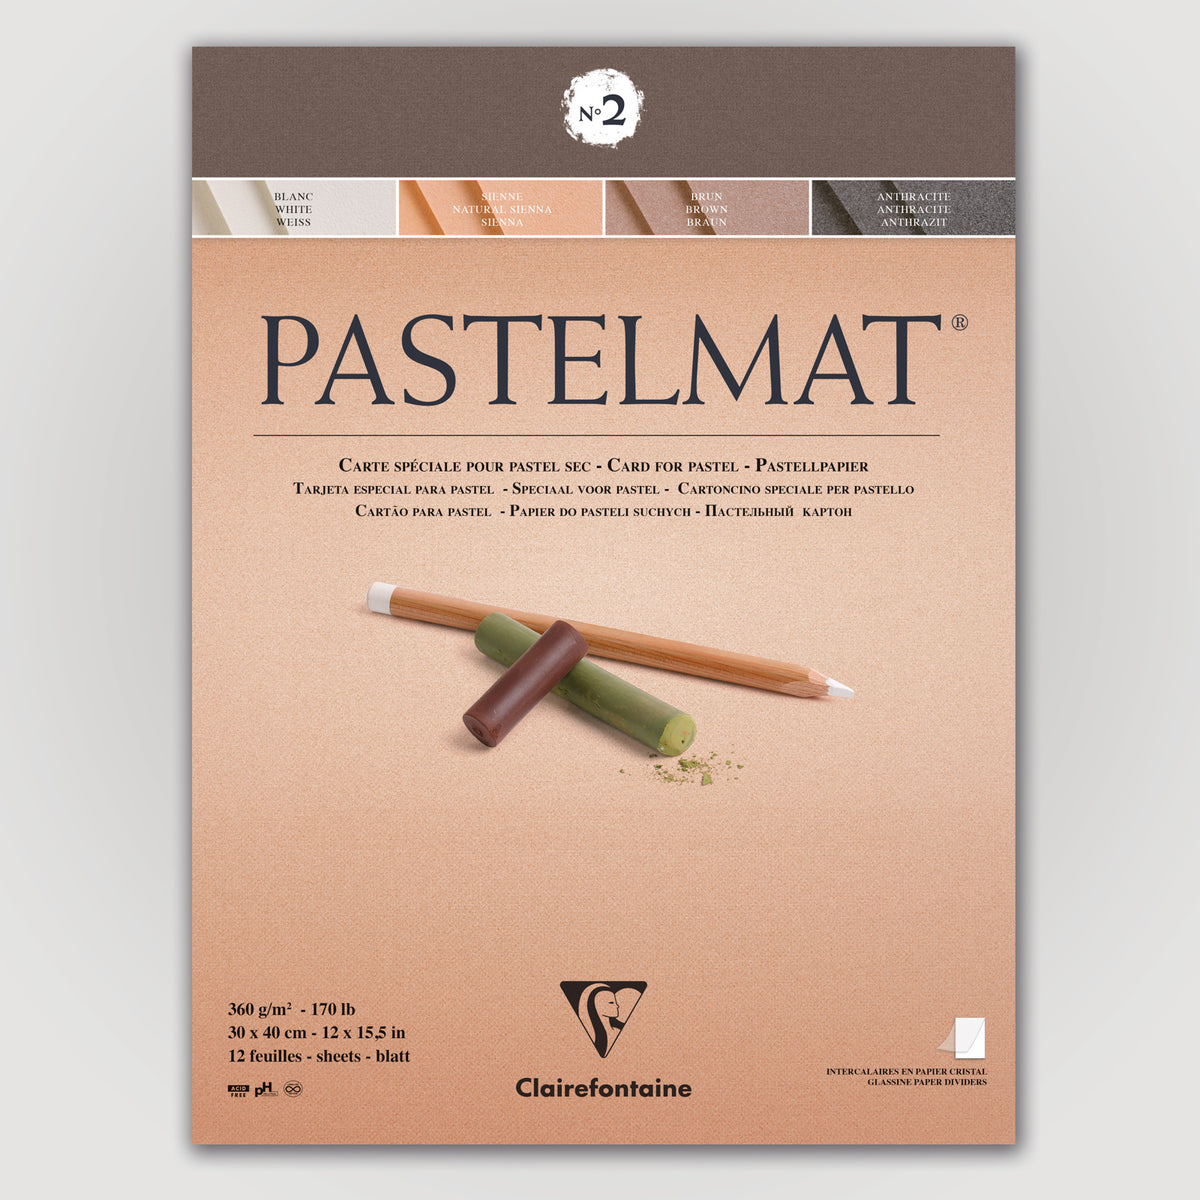 Clairefontaine Pastelmat N°2 360g 30x40 ass 12 sheets